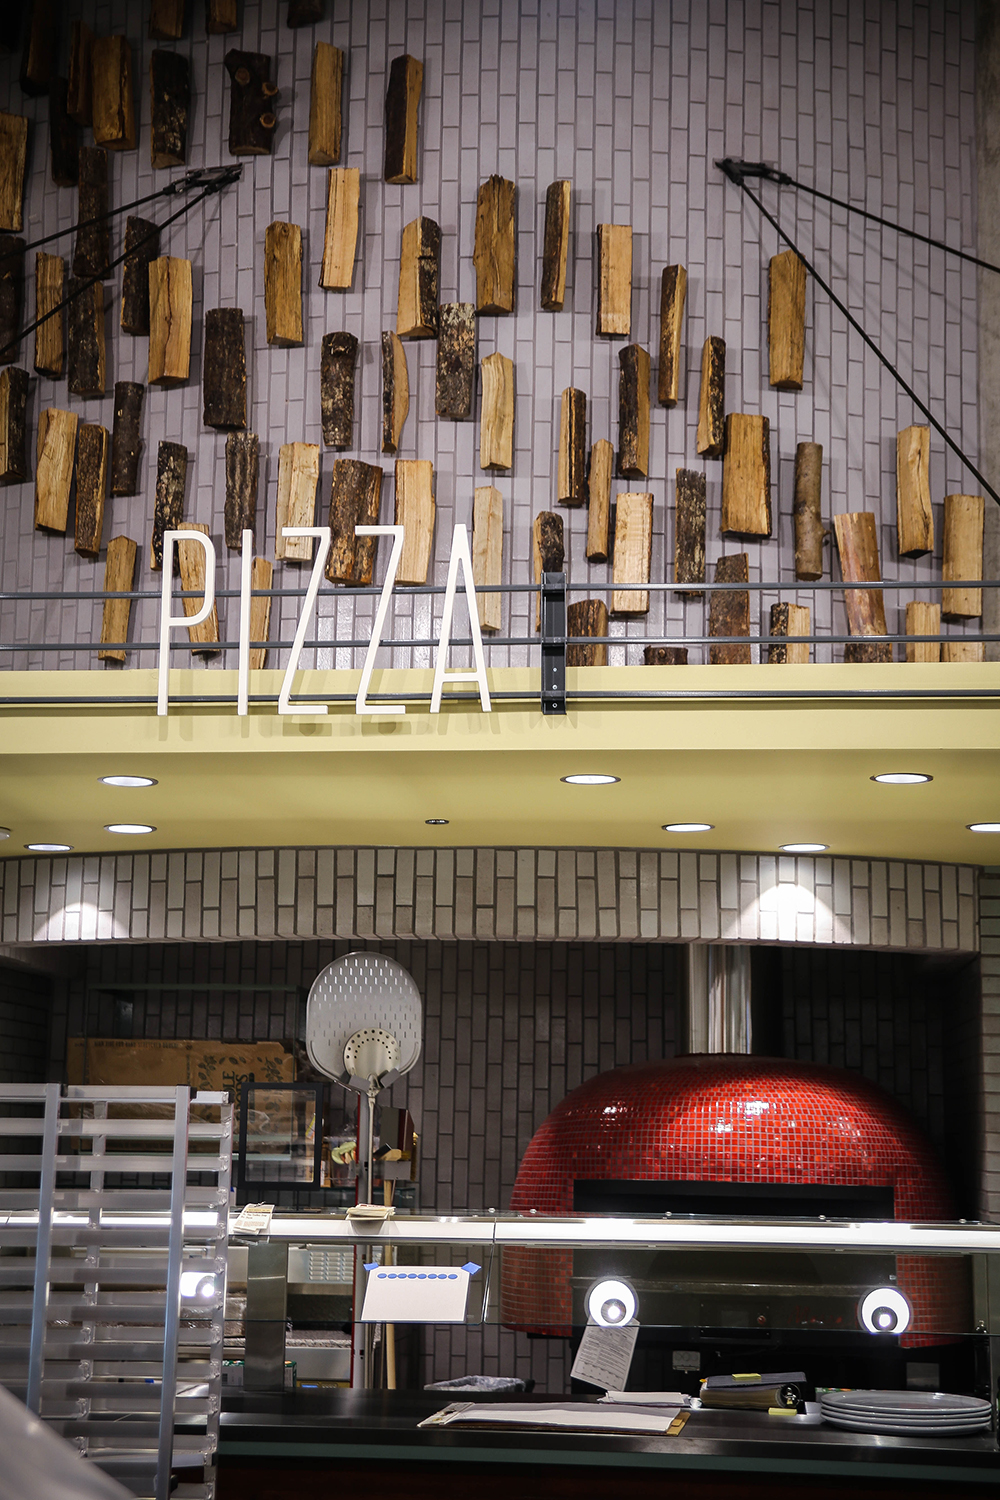 The pizza station. 